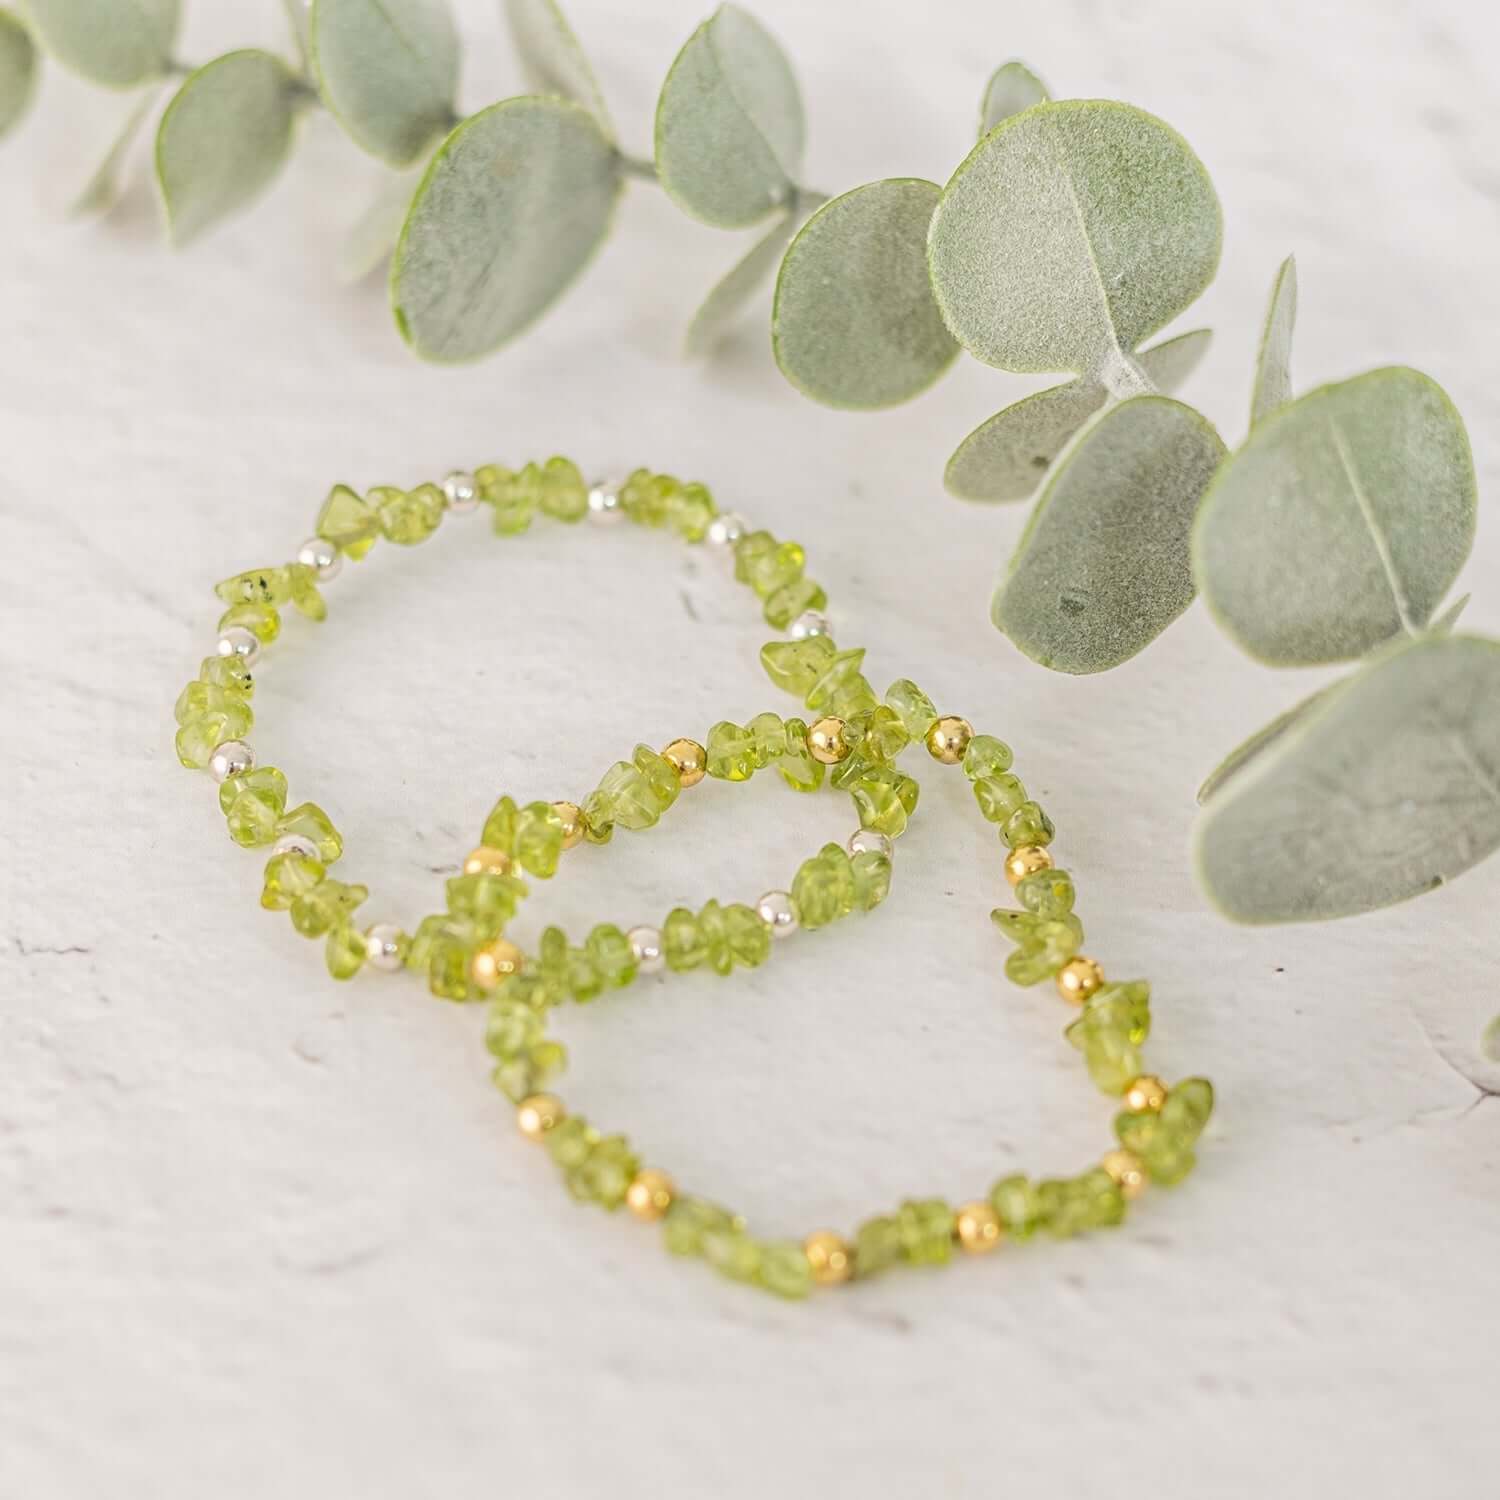 Two green peridot bracelets,featuring beads intermixed with small beads are placed on a light-colored surface.Highlighting August birthstone jewellery, a branch with round, silvery-green leaves serves as a backdrop, adding a natural element to the display